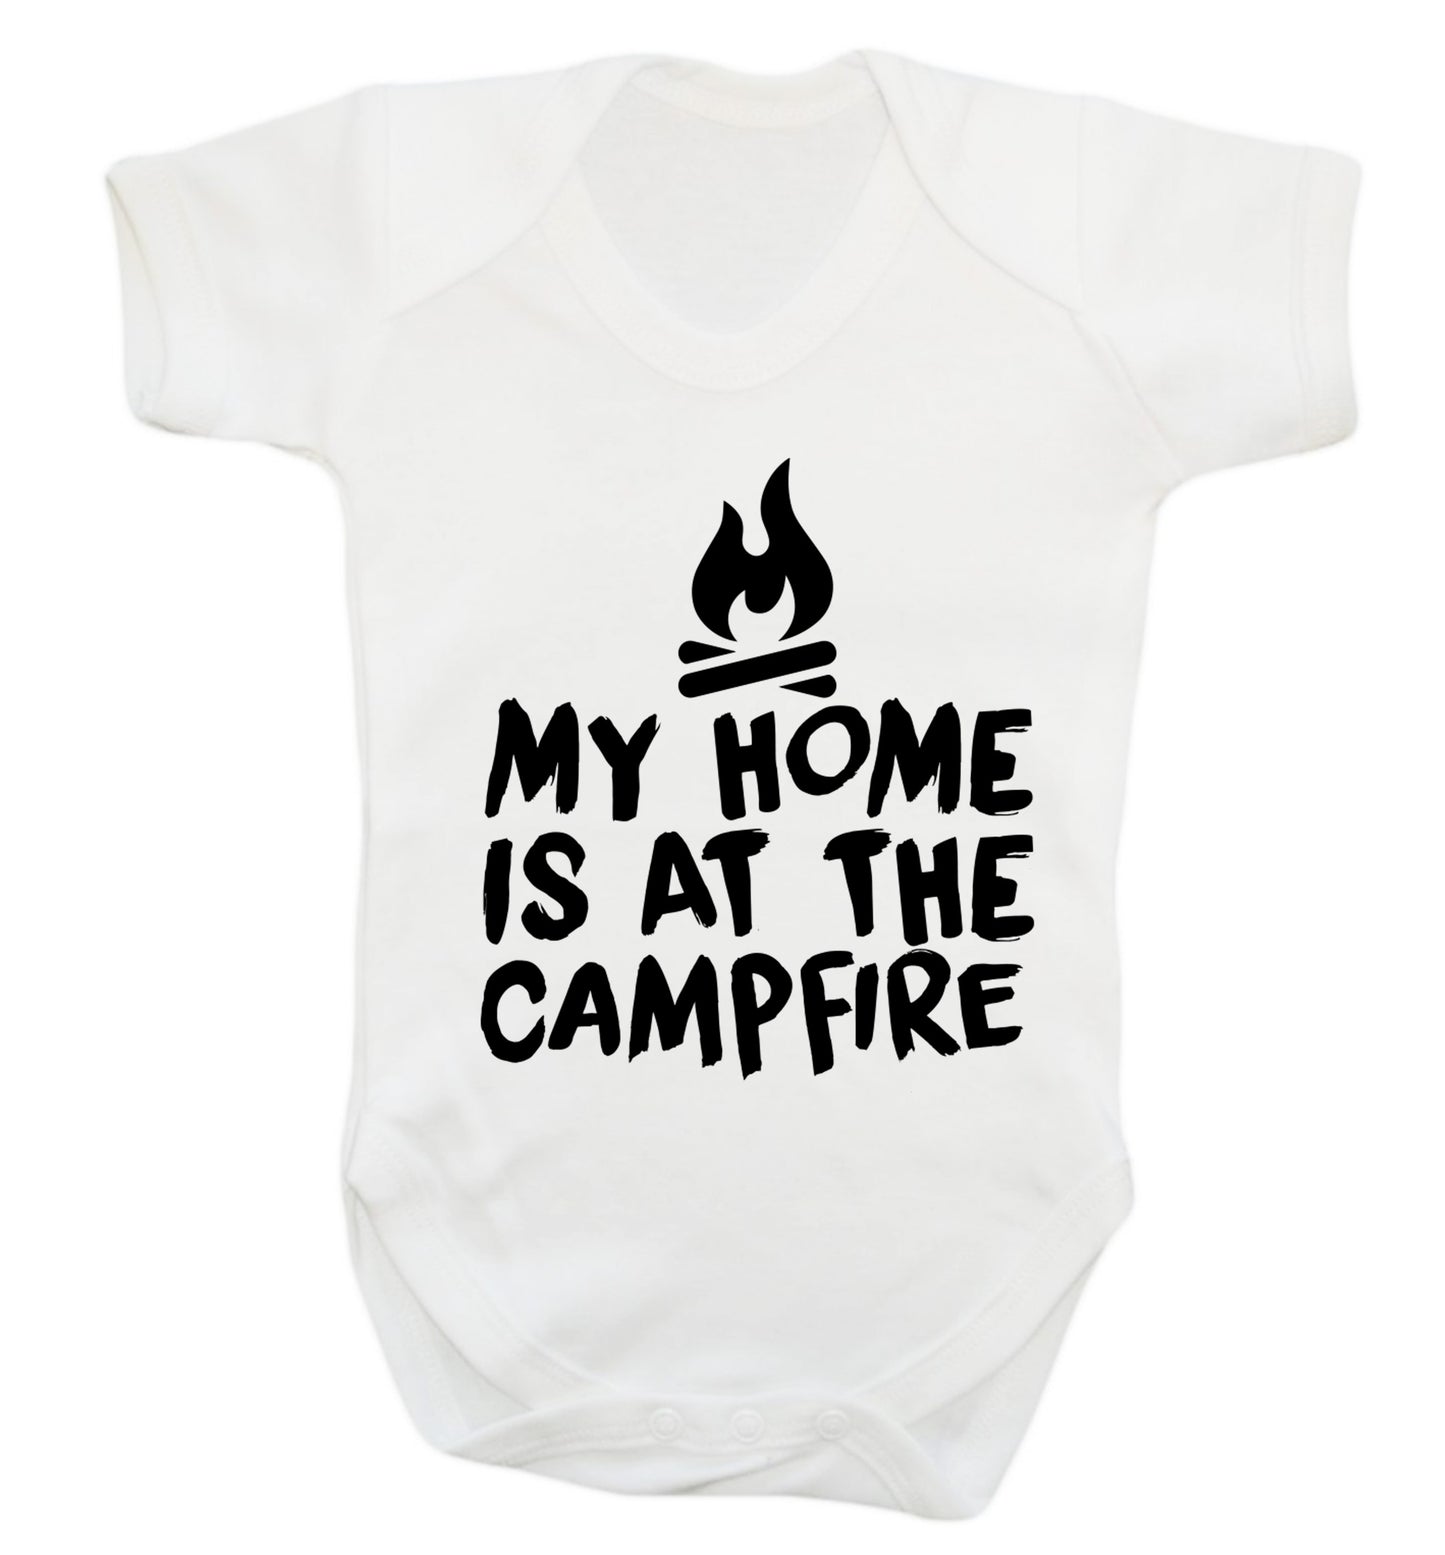 My home is at the campfire Baby Vest white 18-24 months